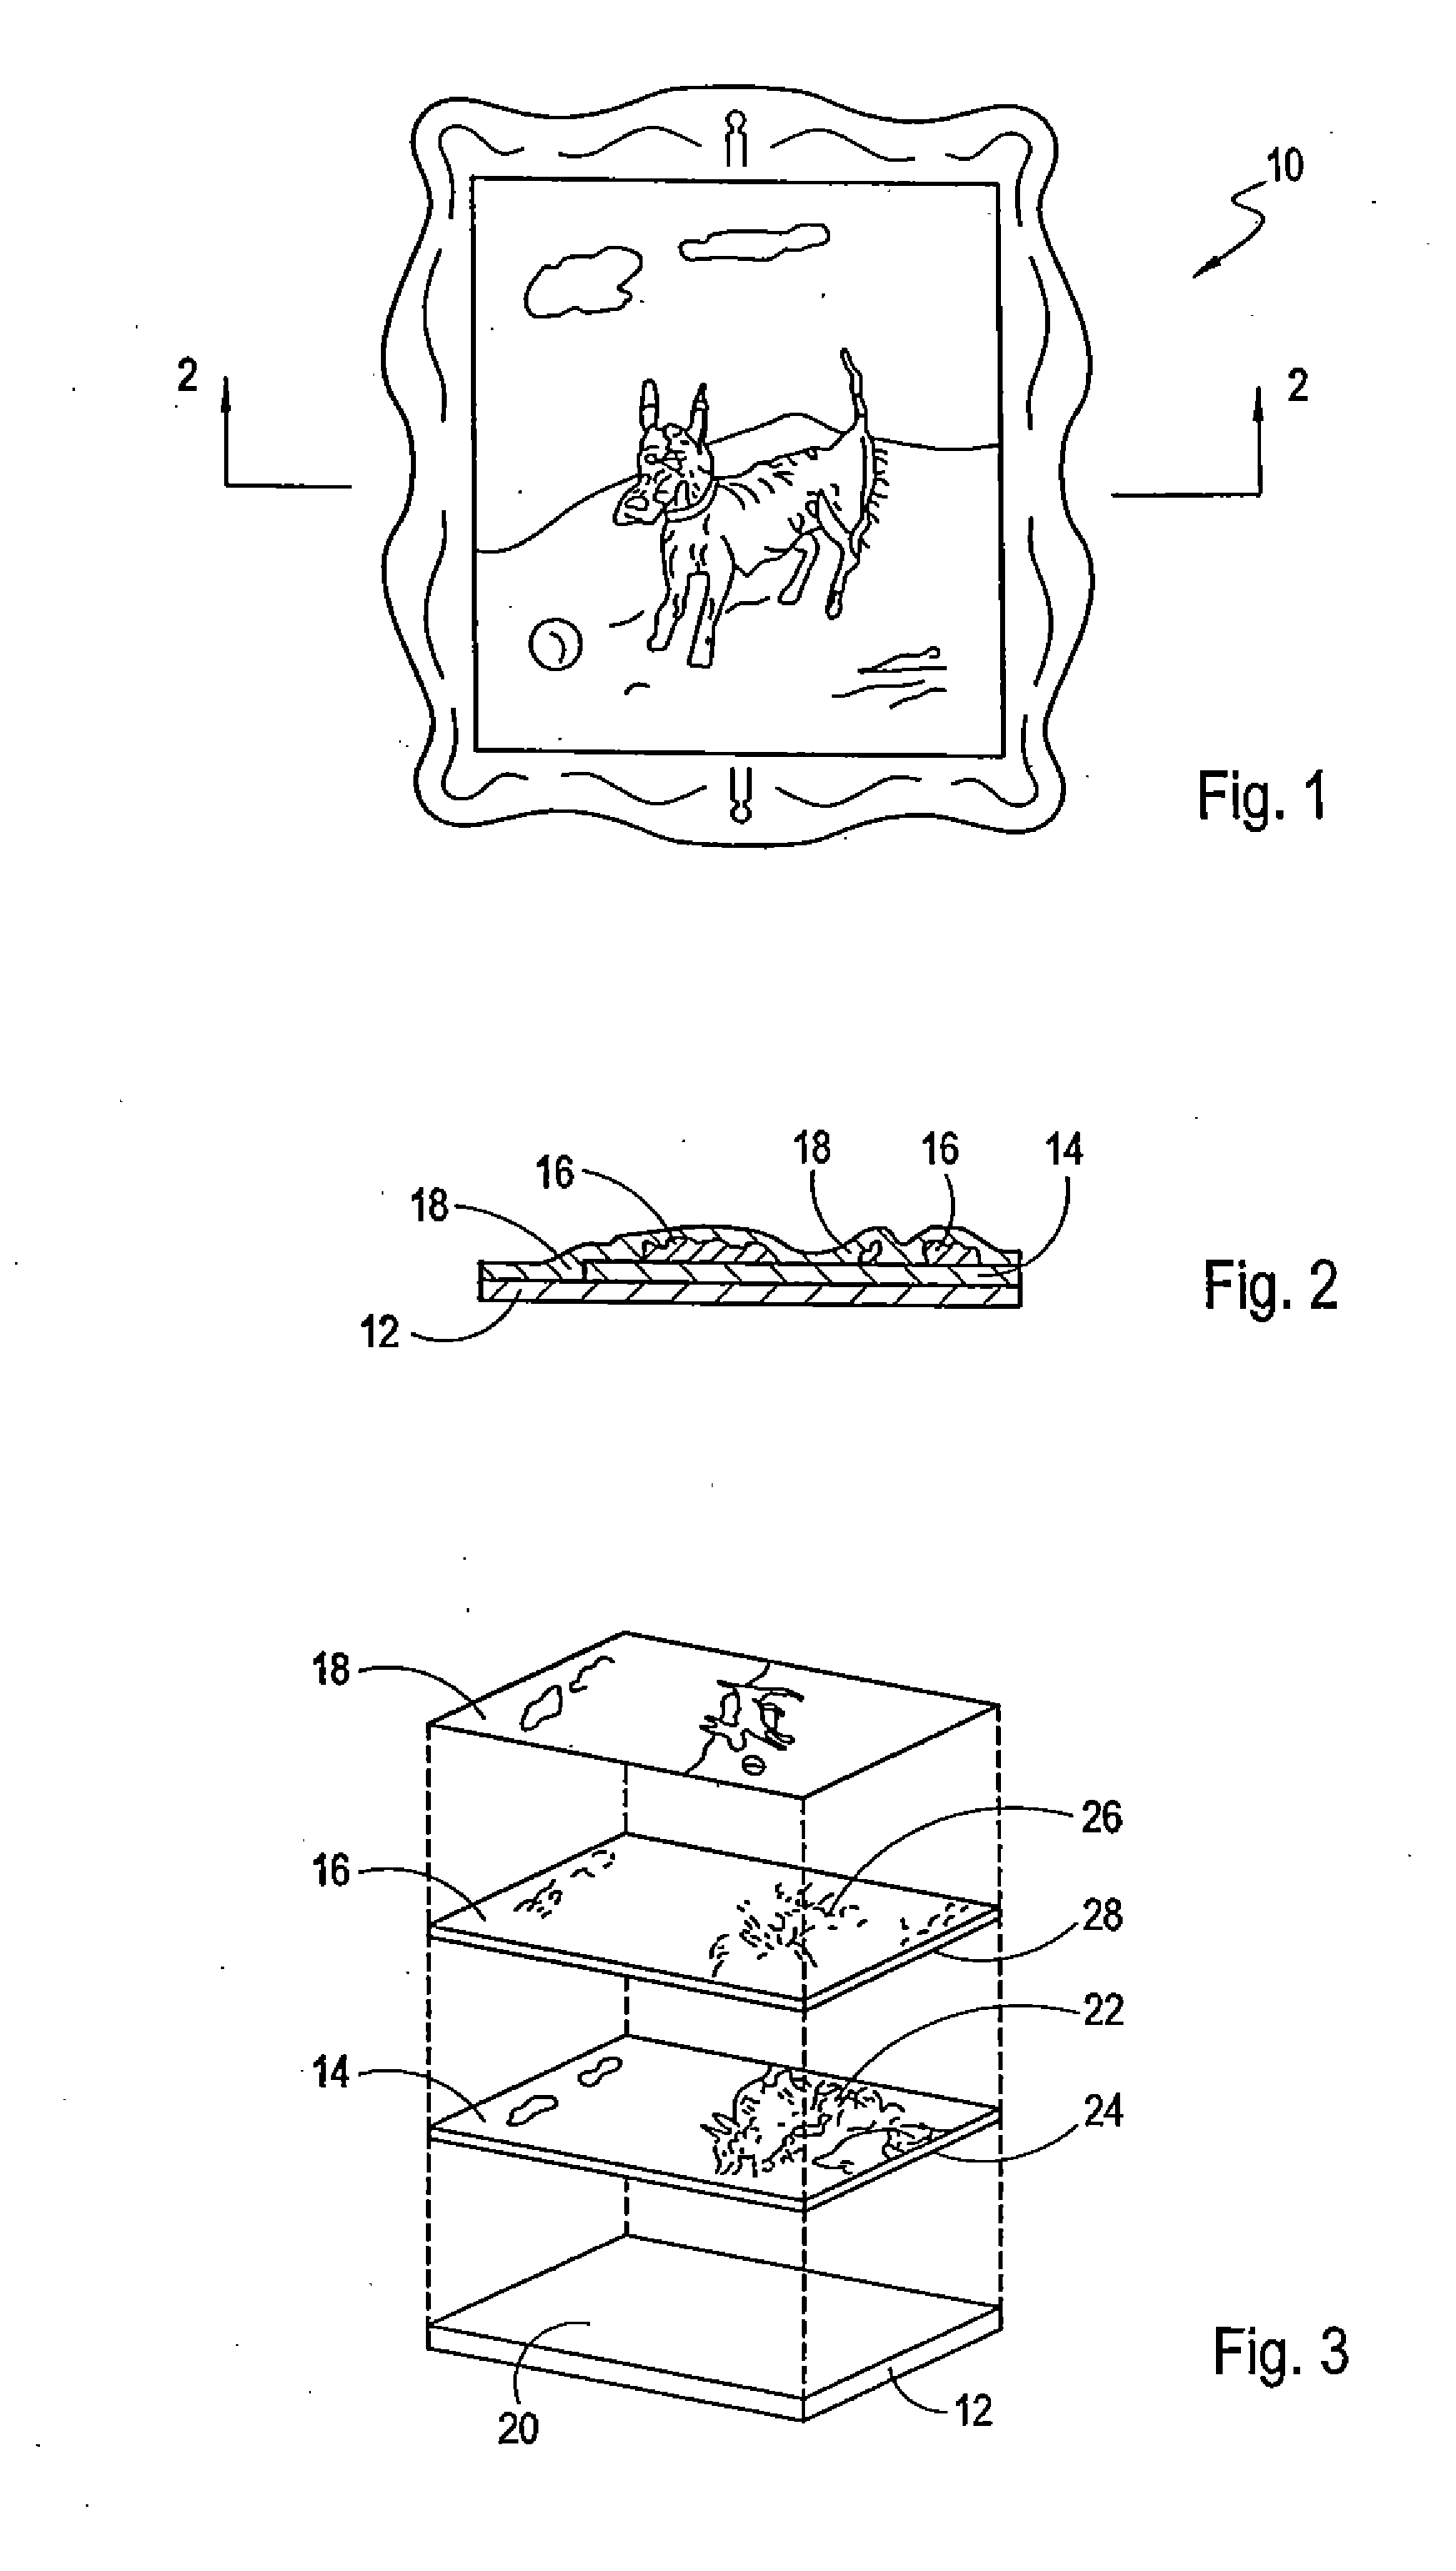 System and method for manufacturing an original work of art